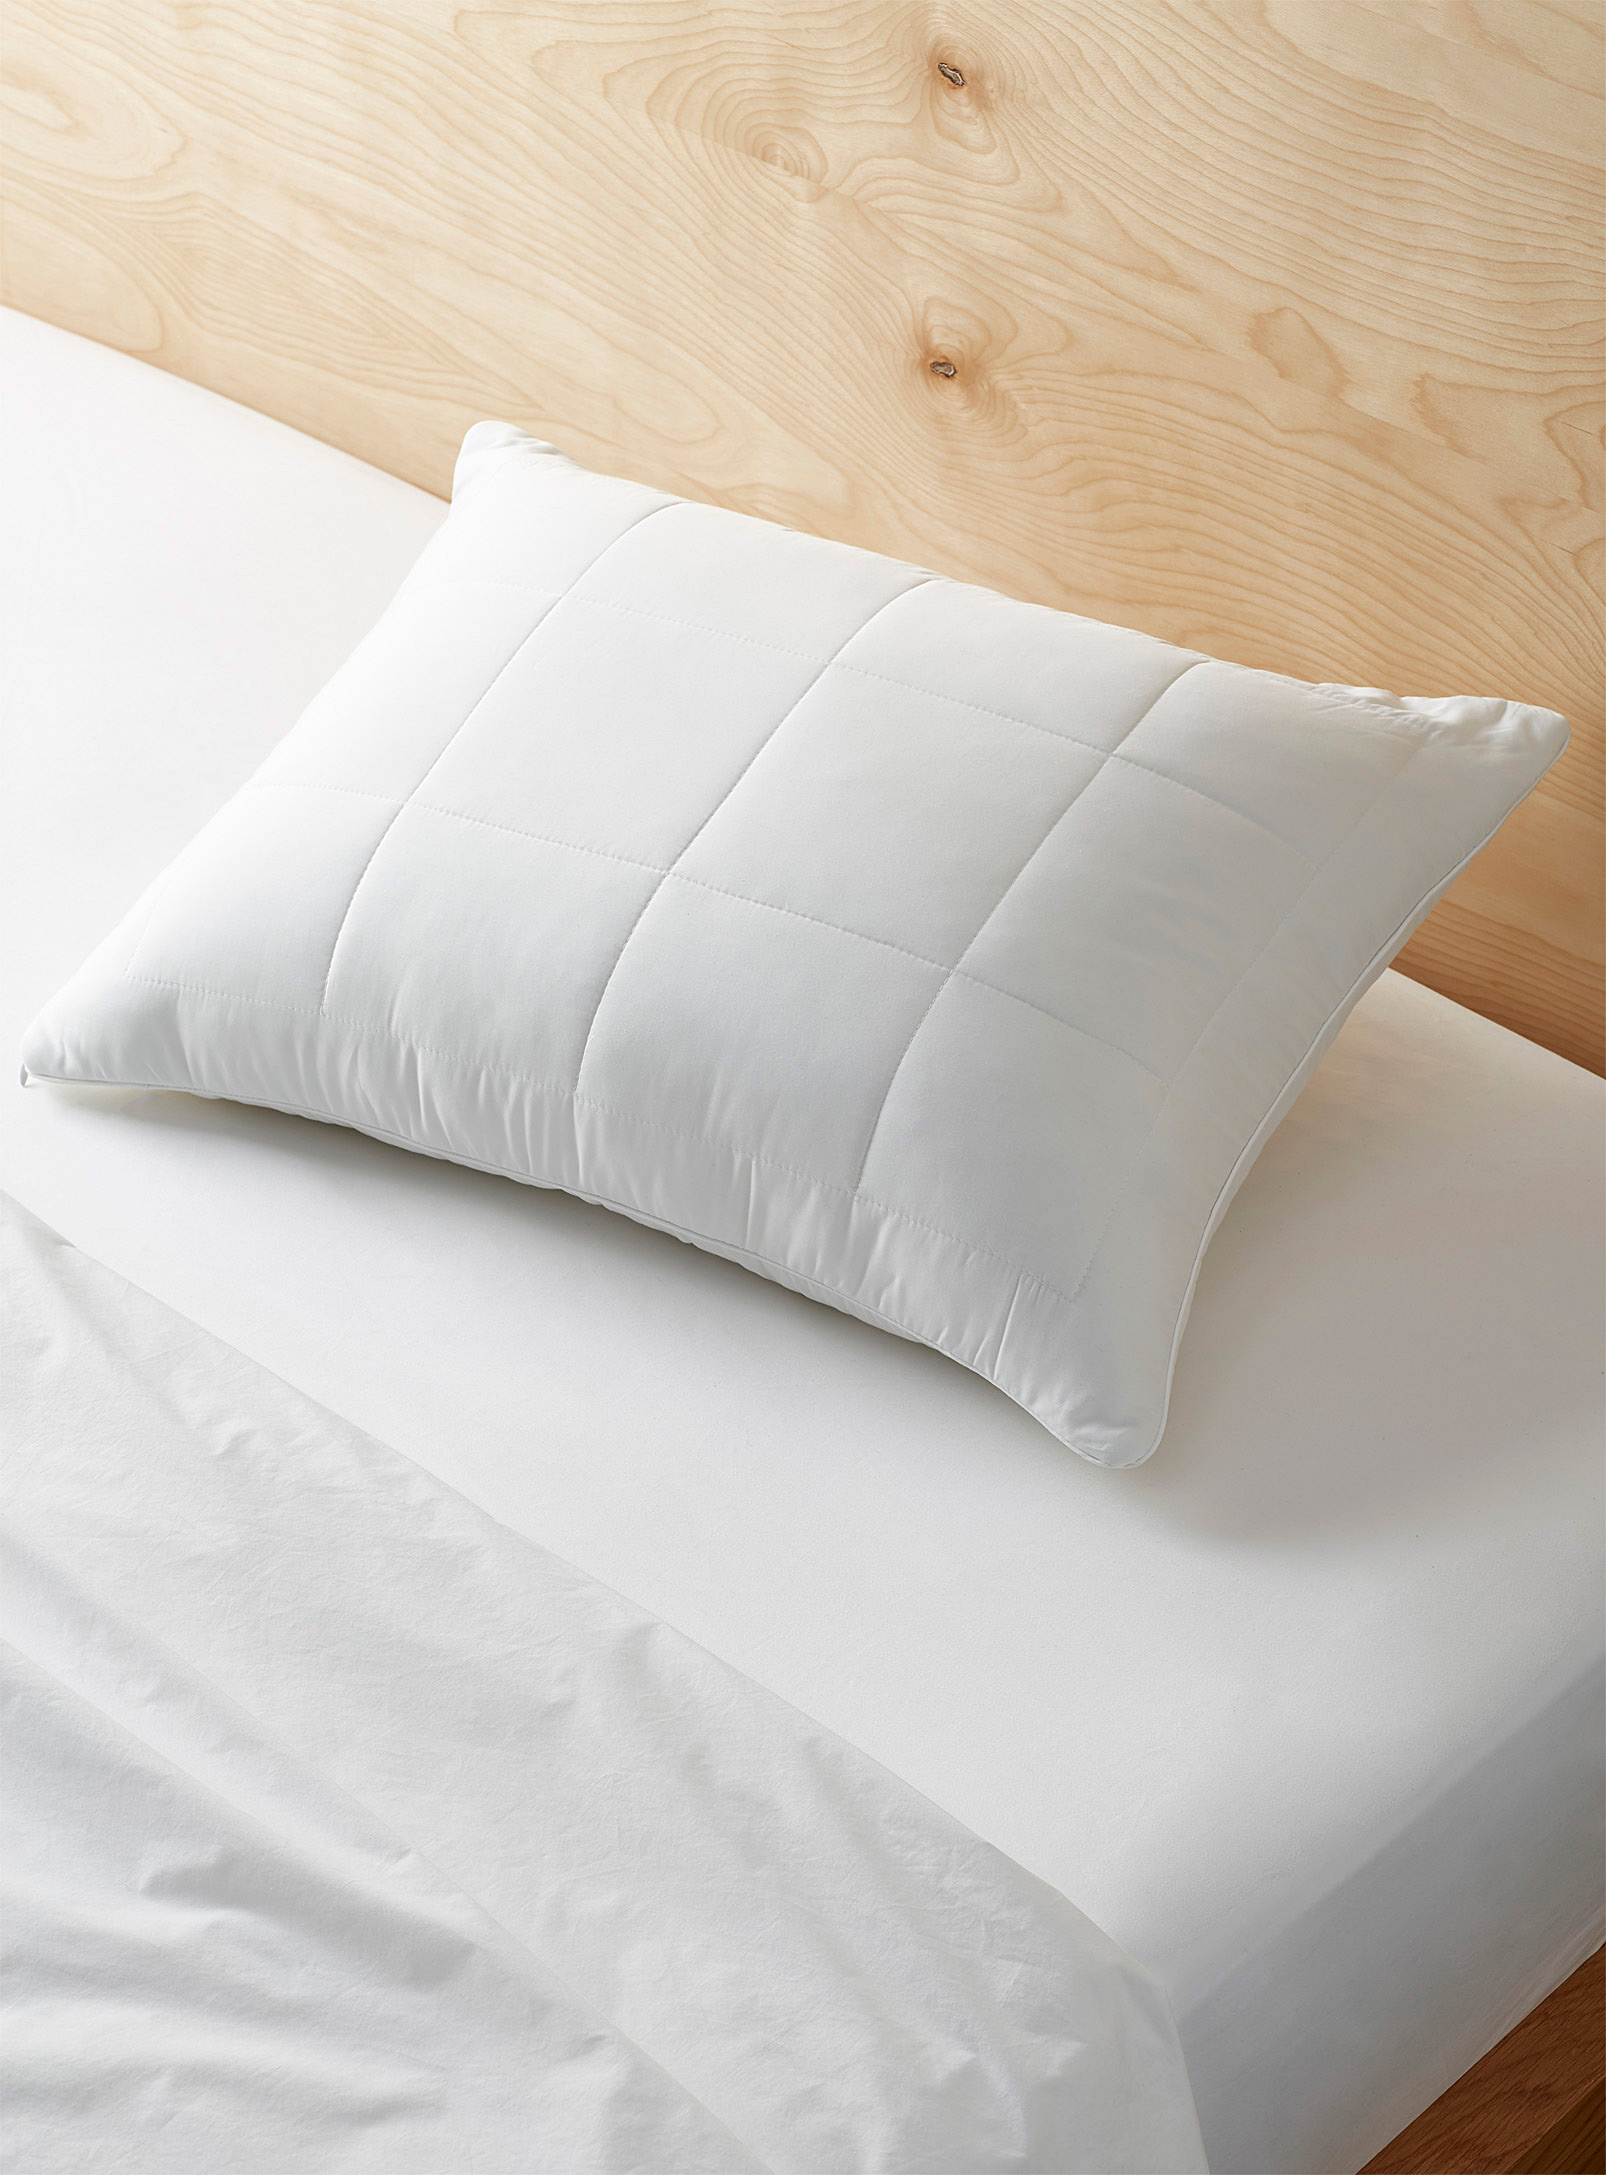 Hôtels Le Germain - Quilted pillow protector